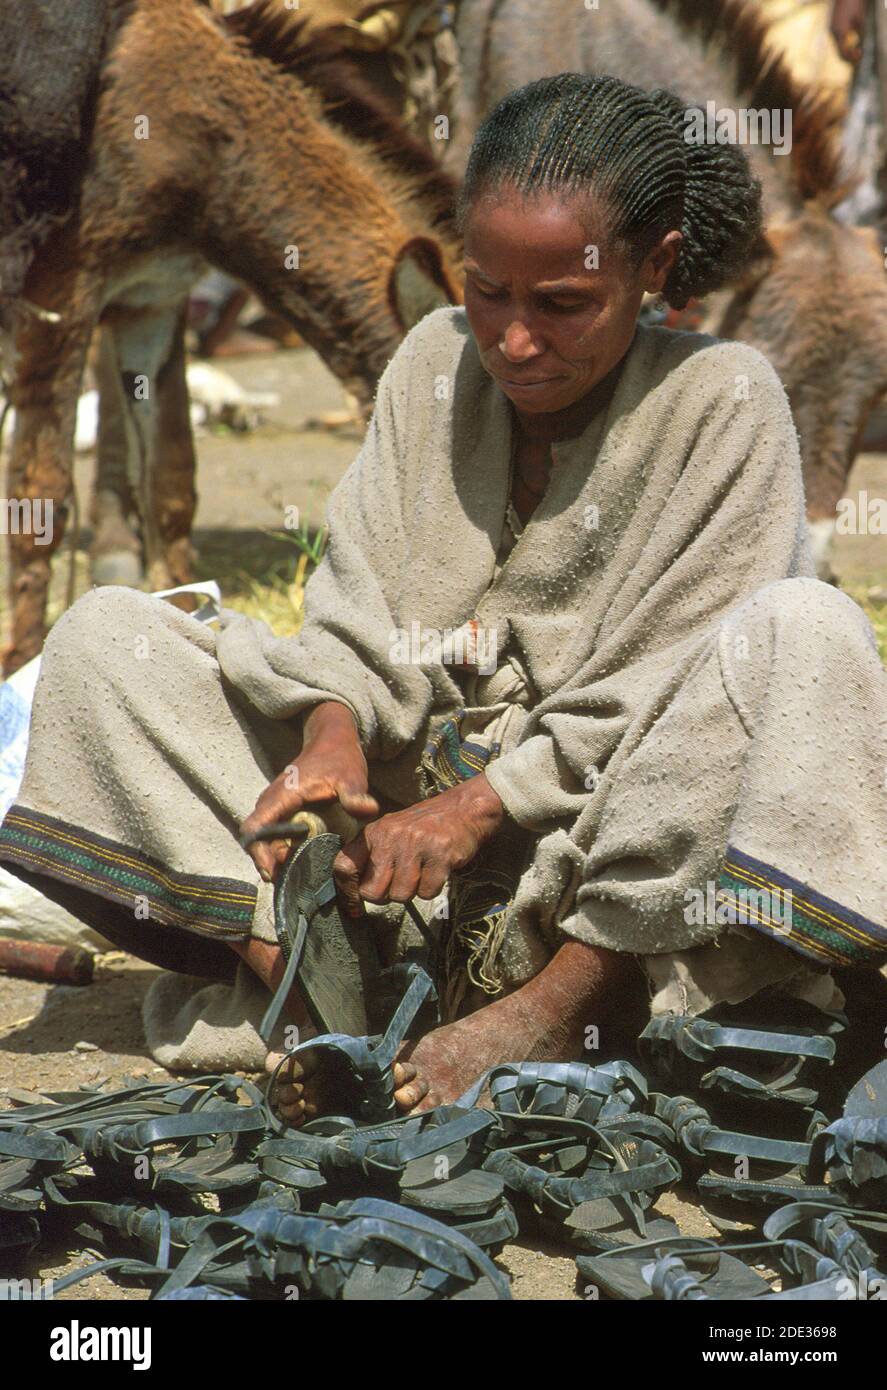 A woman making sandals out of recycled rubber tyres. Mekoni, Tigray, Ethiopia Stock Photo